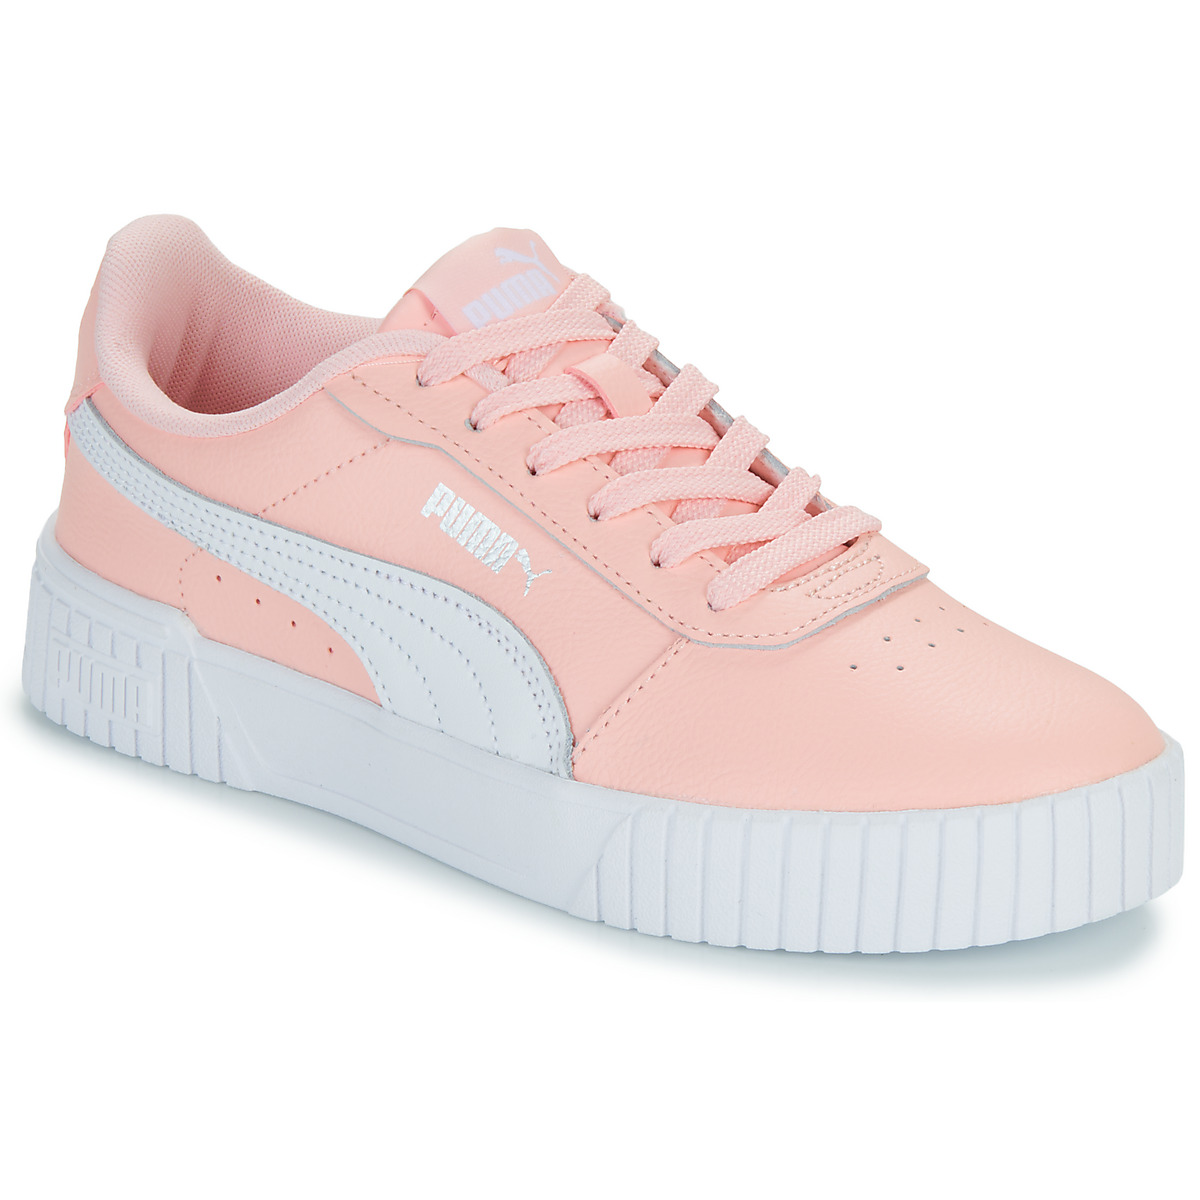 puma  carina 2.0 jr  girls's children's shoes (trainers) in pink